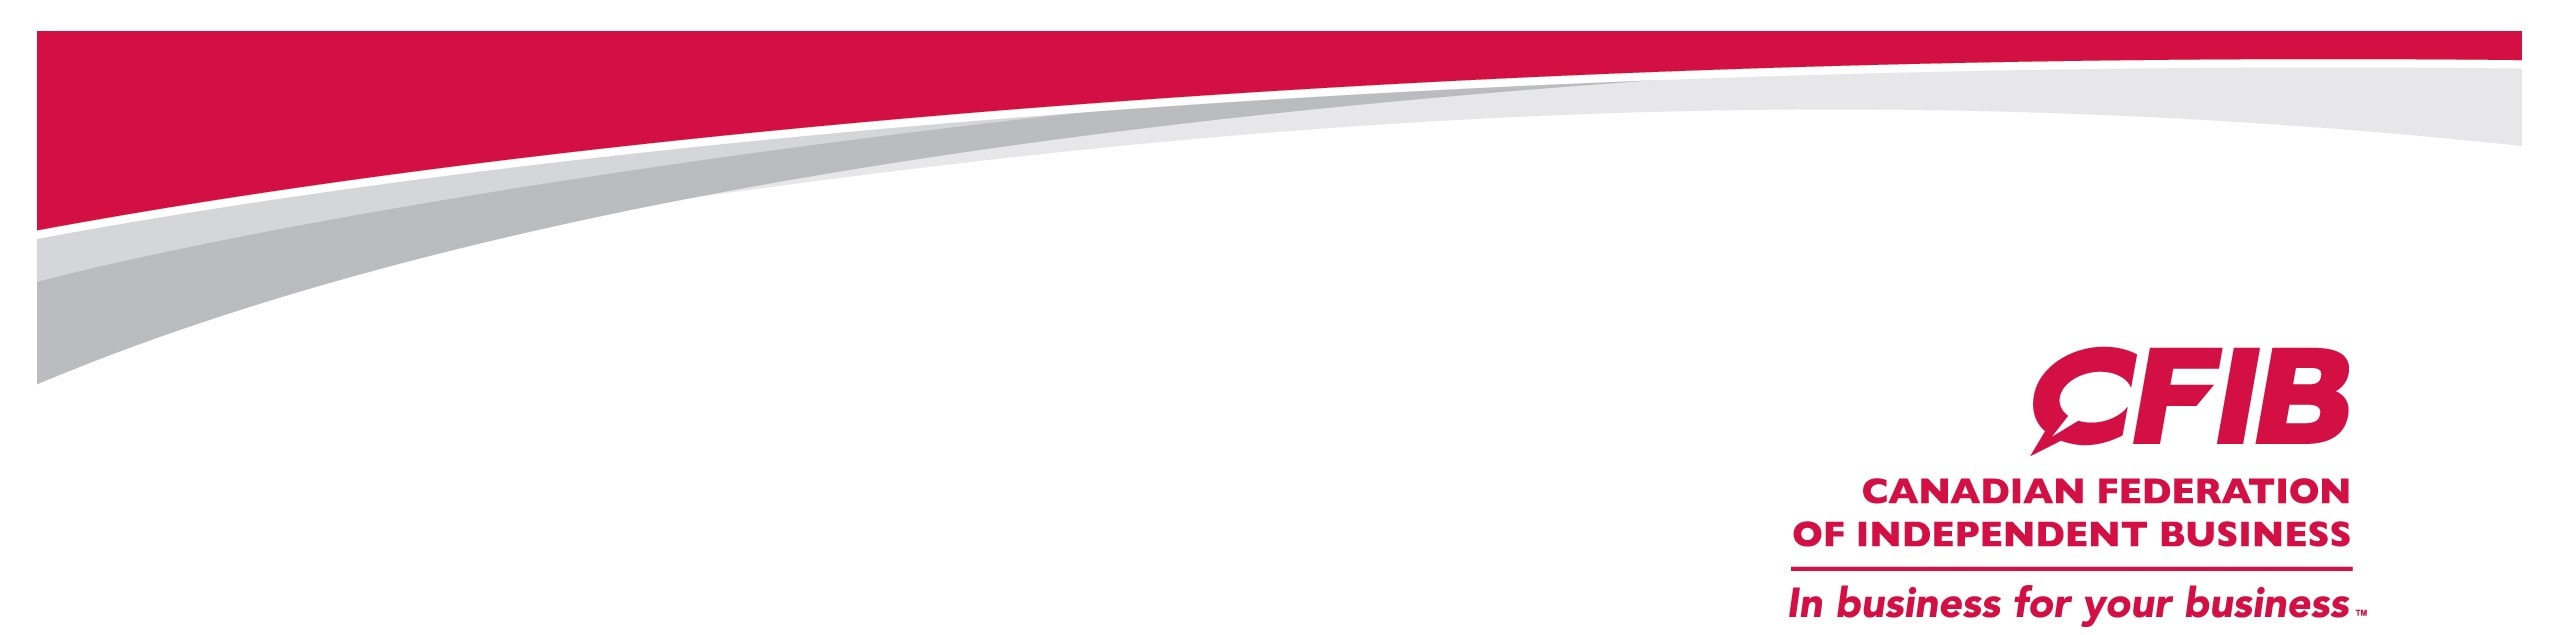 CFIB - Canadian Federation of Independent Business logo